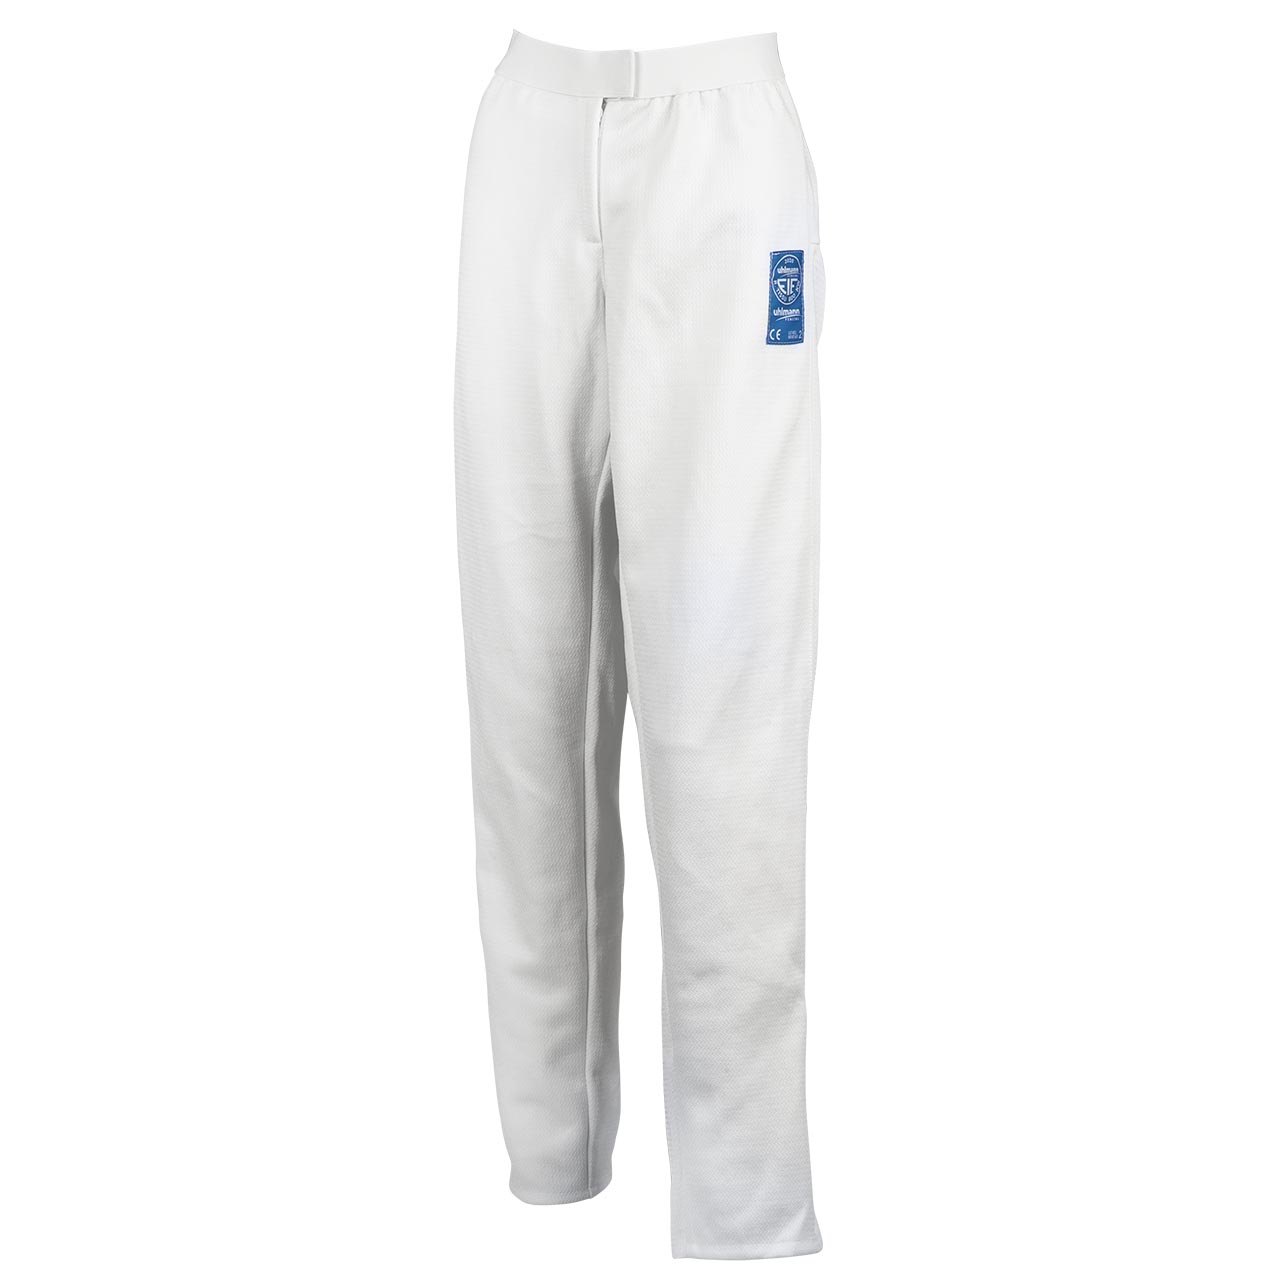 pants "Olympia" women, for wheelchair fencers FIE 800N